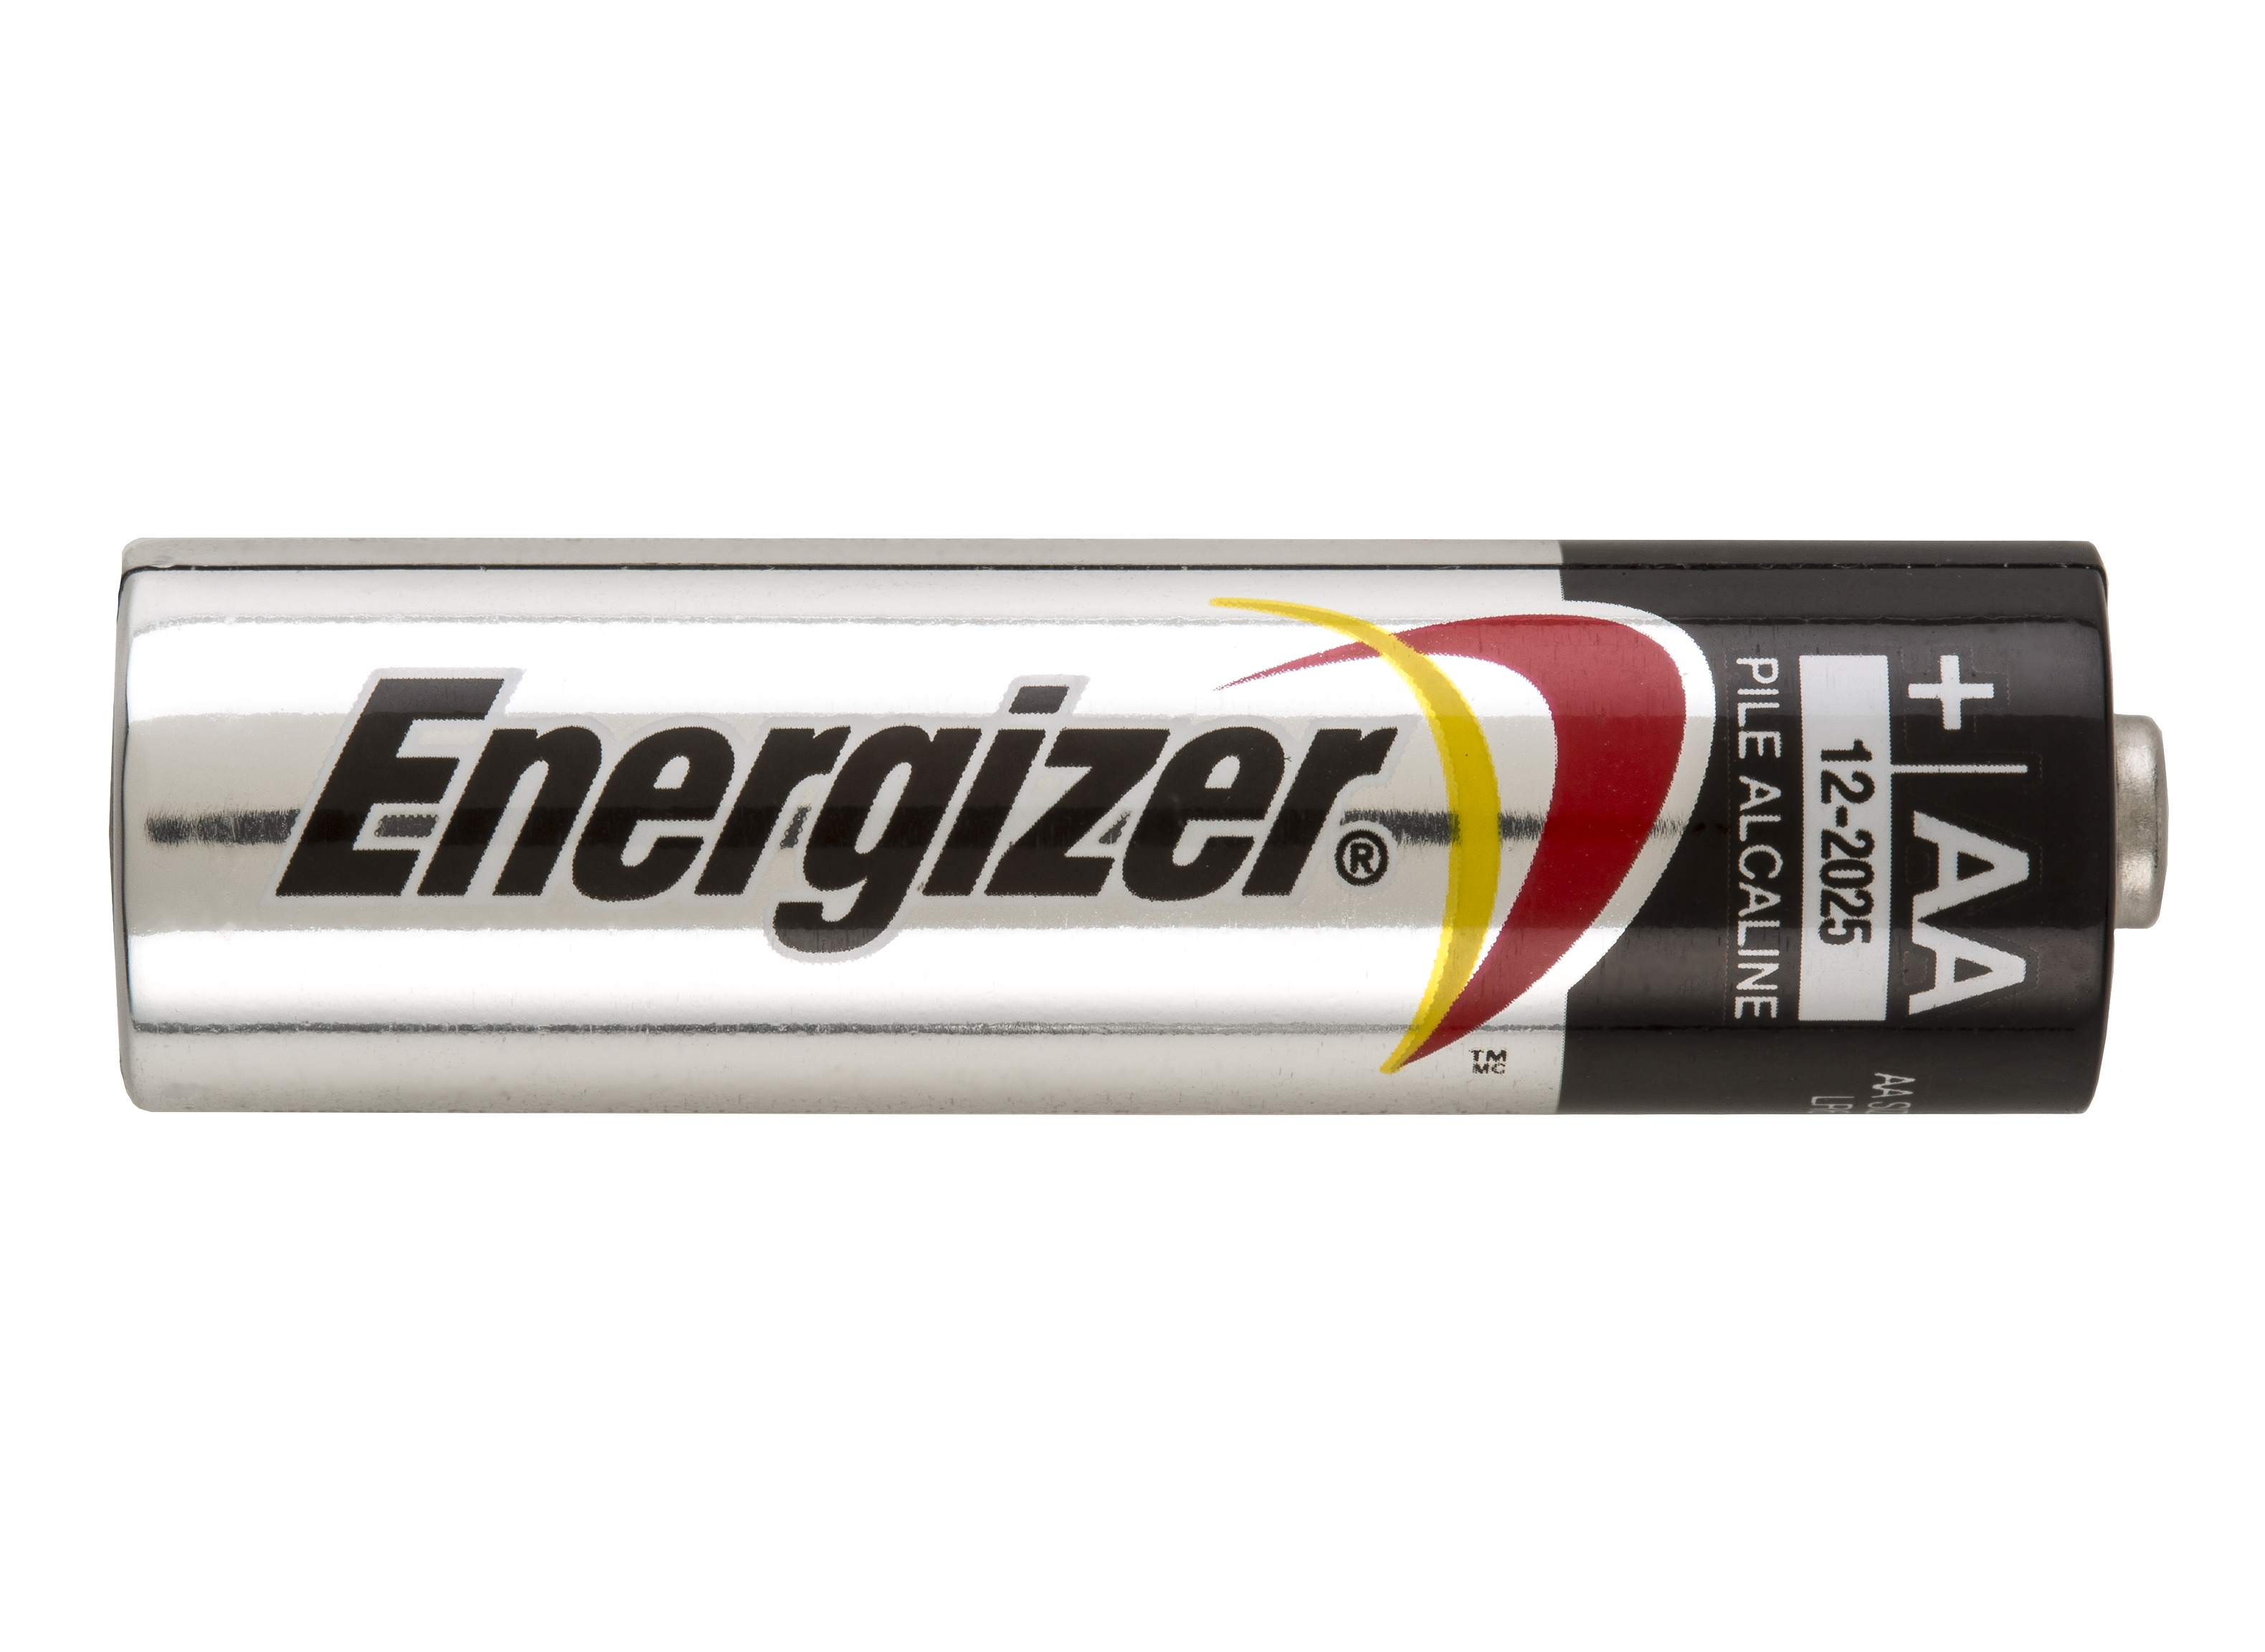 Energizer MAX +PowerSeal AA Alkaline Battery Review - Consumer Reports